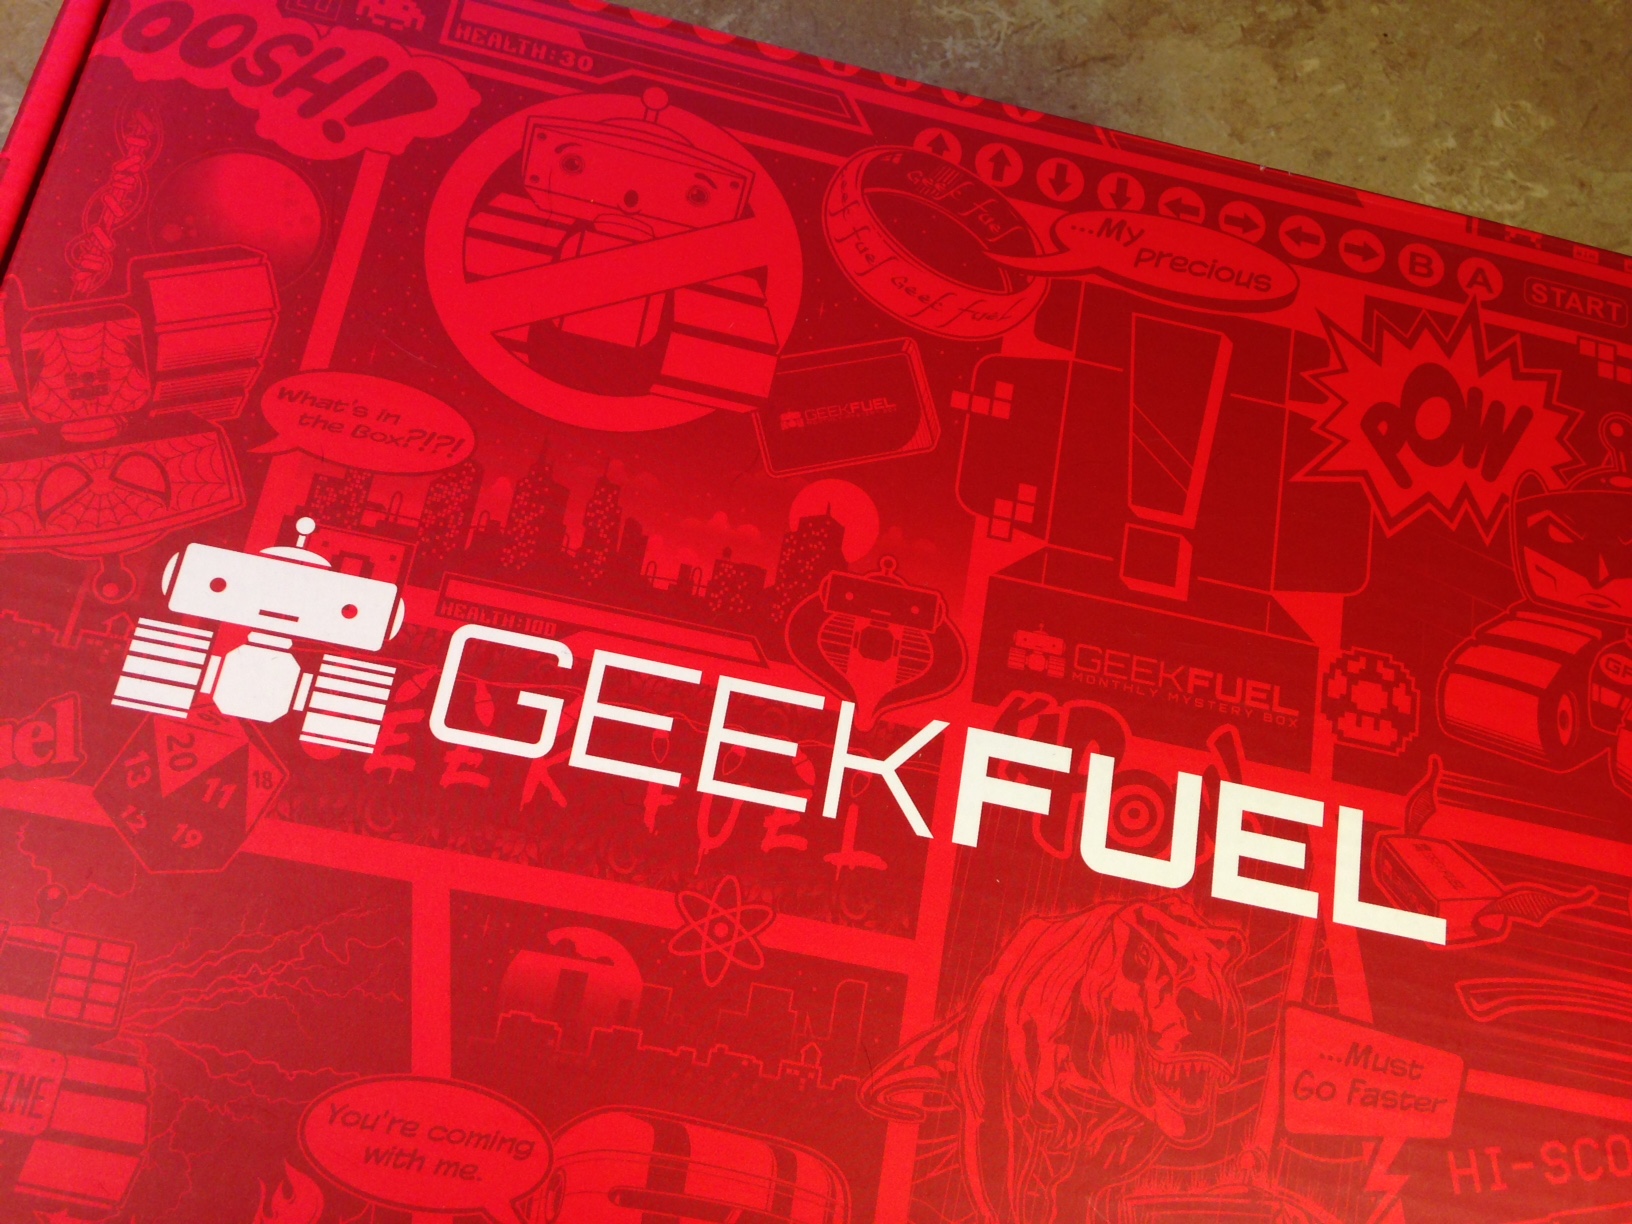 Geek insider, geekinsider, geekinsider. Com,, unboxing the xl geek fuel box + $3 off next purchase, reviews